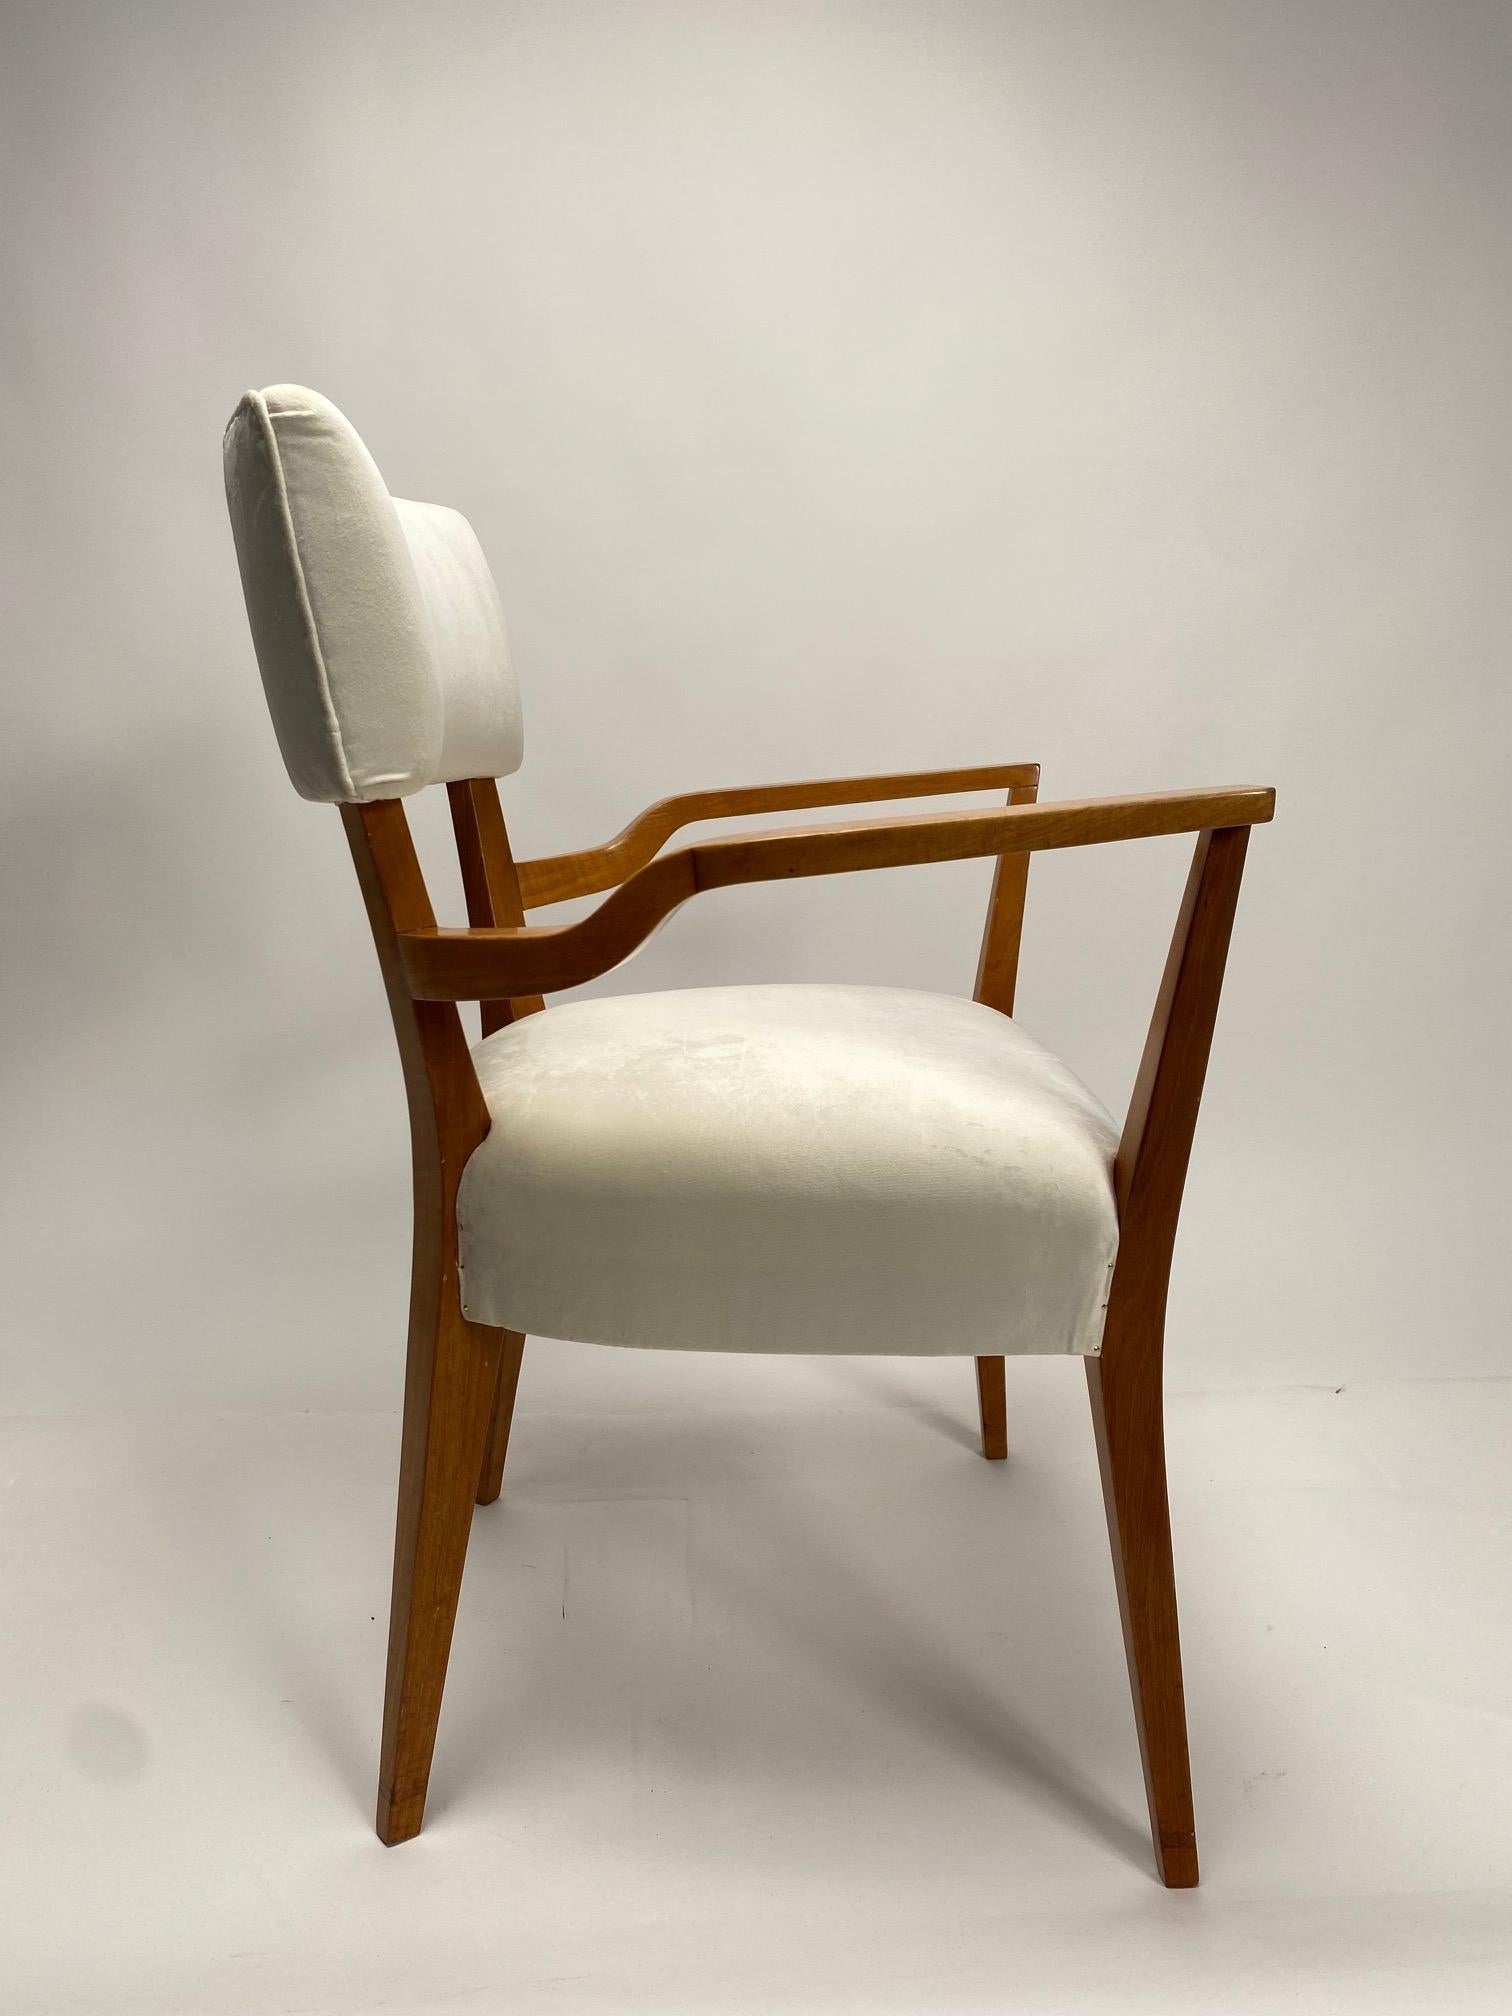 Rare and sophisticated pair of Mid-Century Italian Organic Armchairs from an important villa in Bologna. Gio Ponti Style, velvet and wood, 1950s

The wood was polished by our restorers, who reupholstered the chairs in white velvet